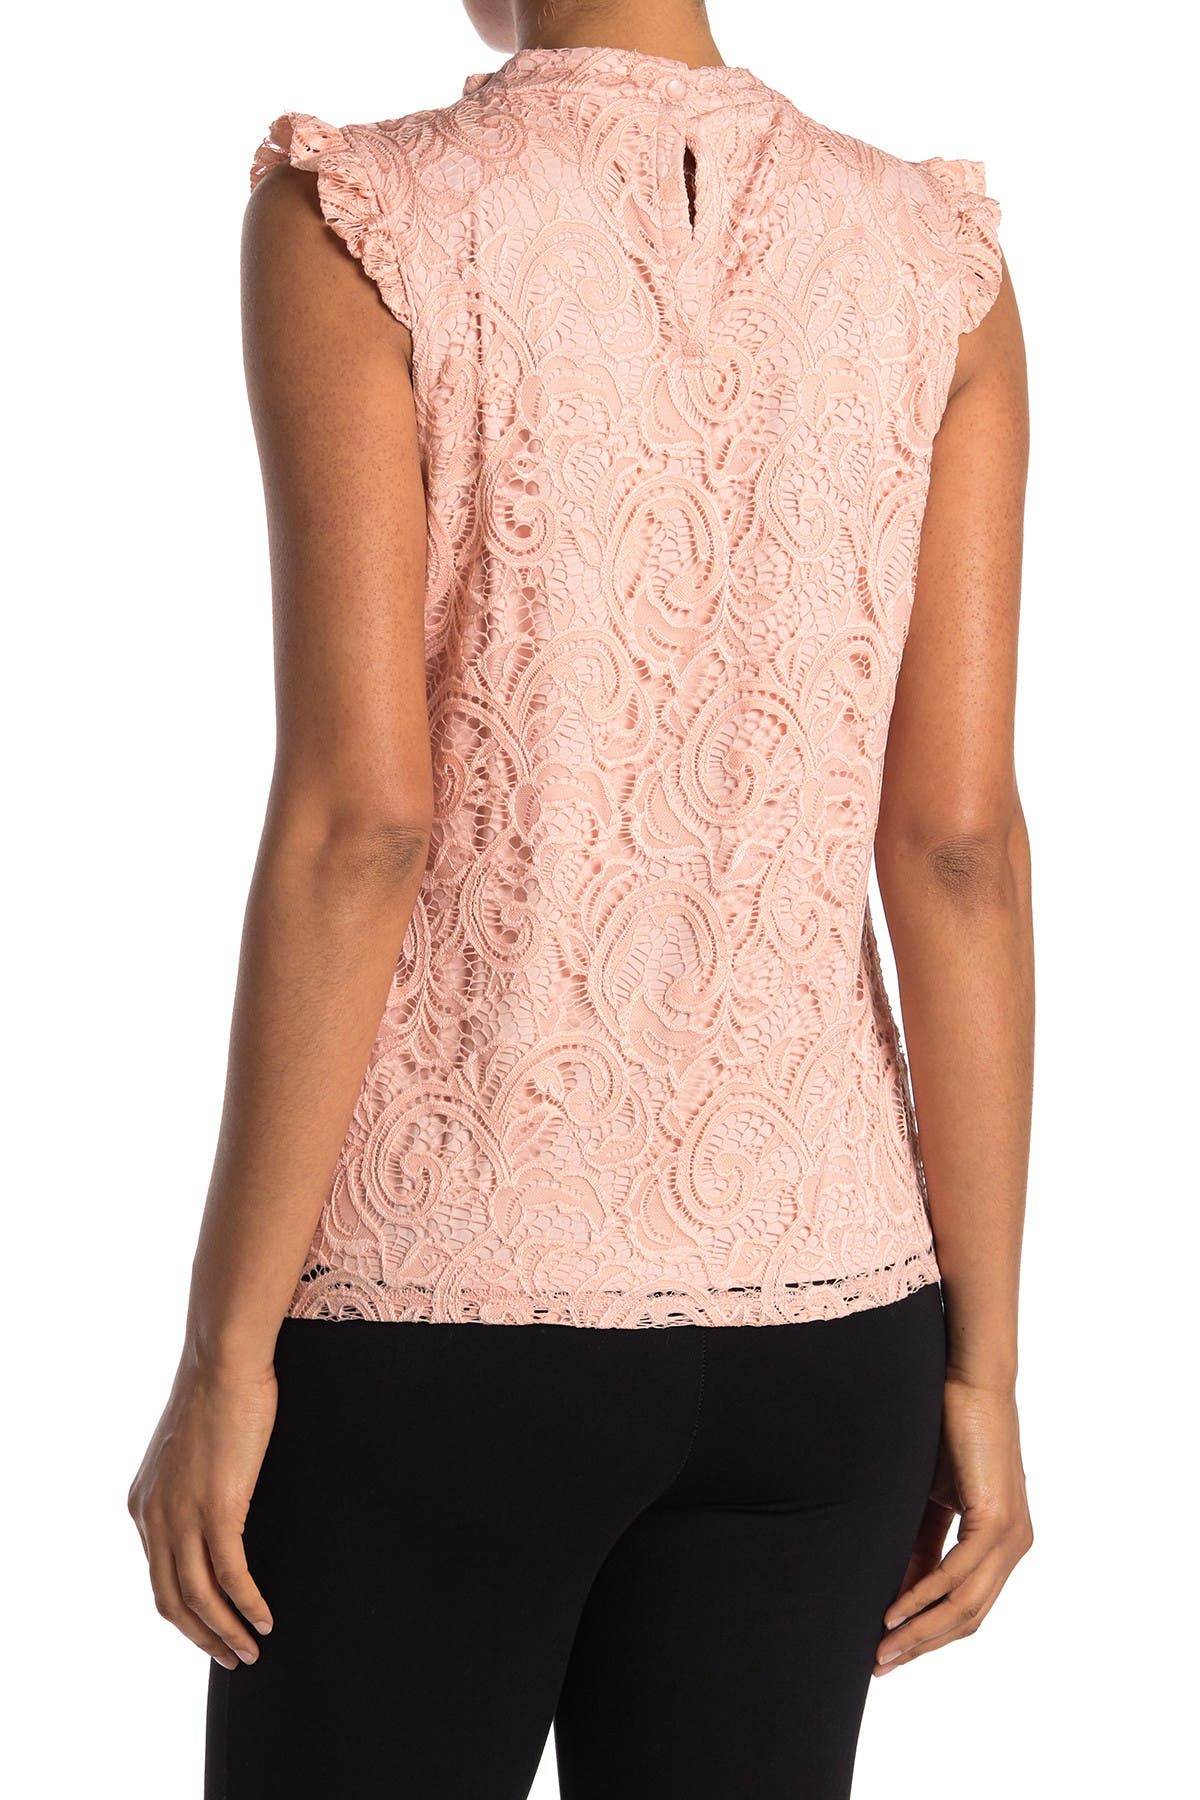 Adrianna Papell Paisley Lace Knit Sleeveless Top In Light/pastel Pink5